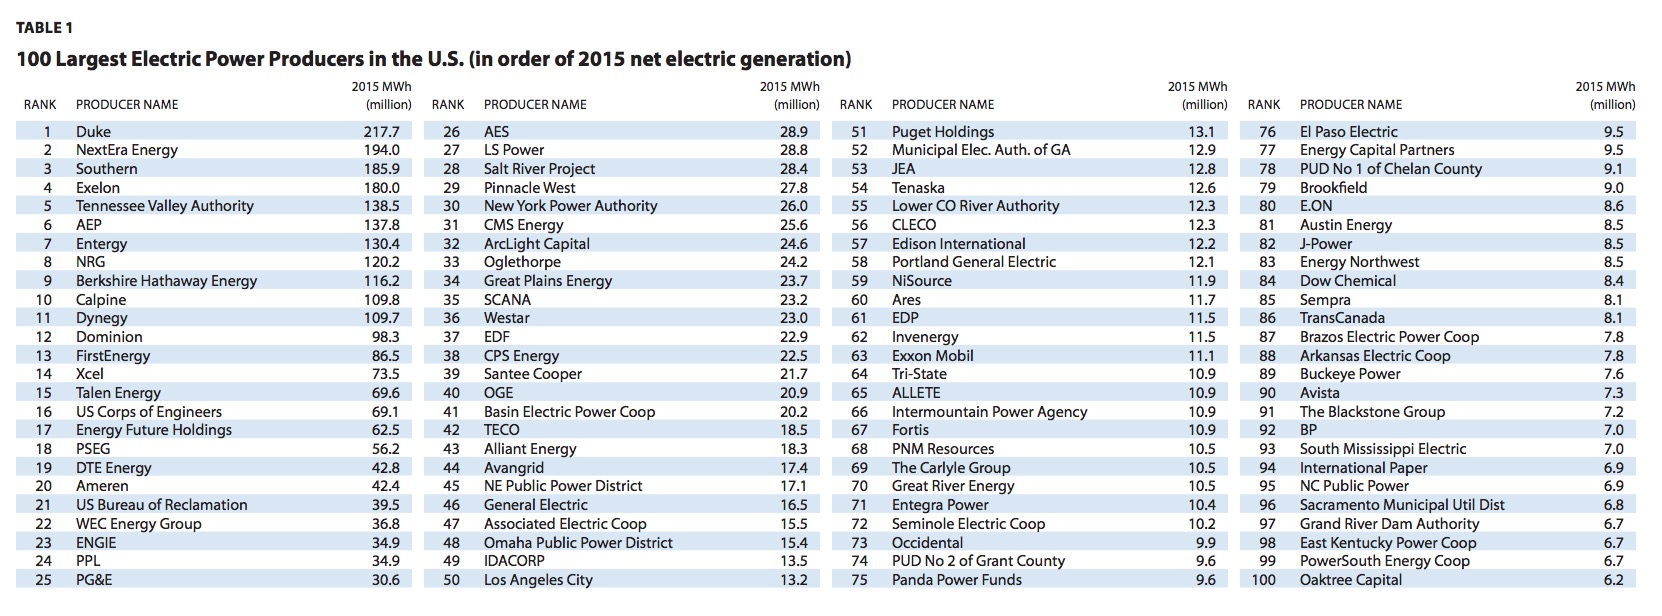 TABLE 1 100 Largest Electric Power Producers in the U.S. (in order of 2015 net electric generation)